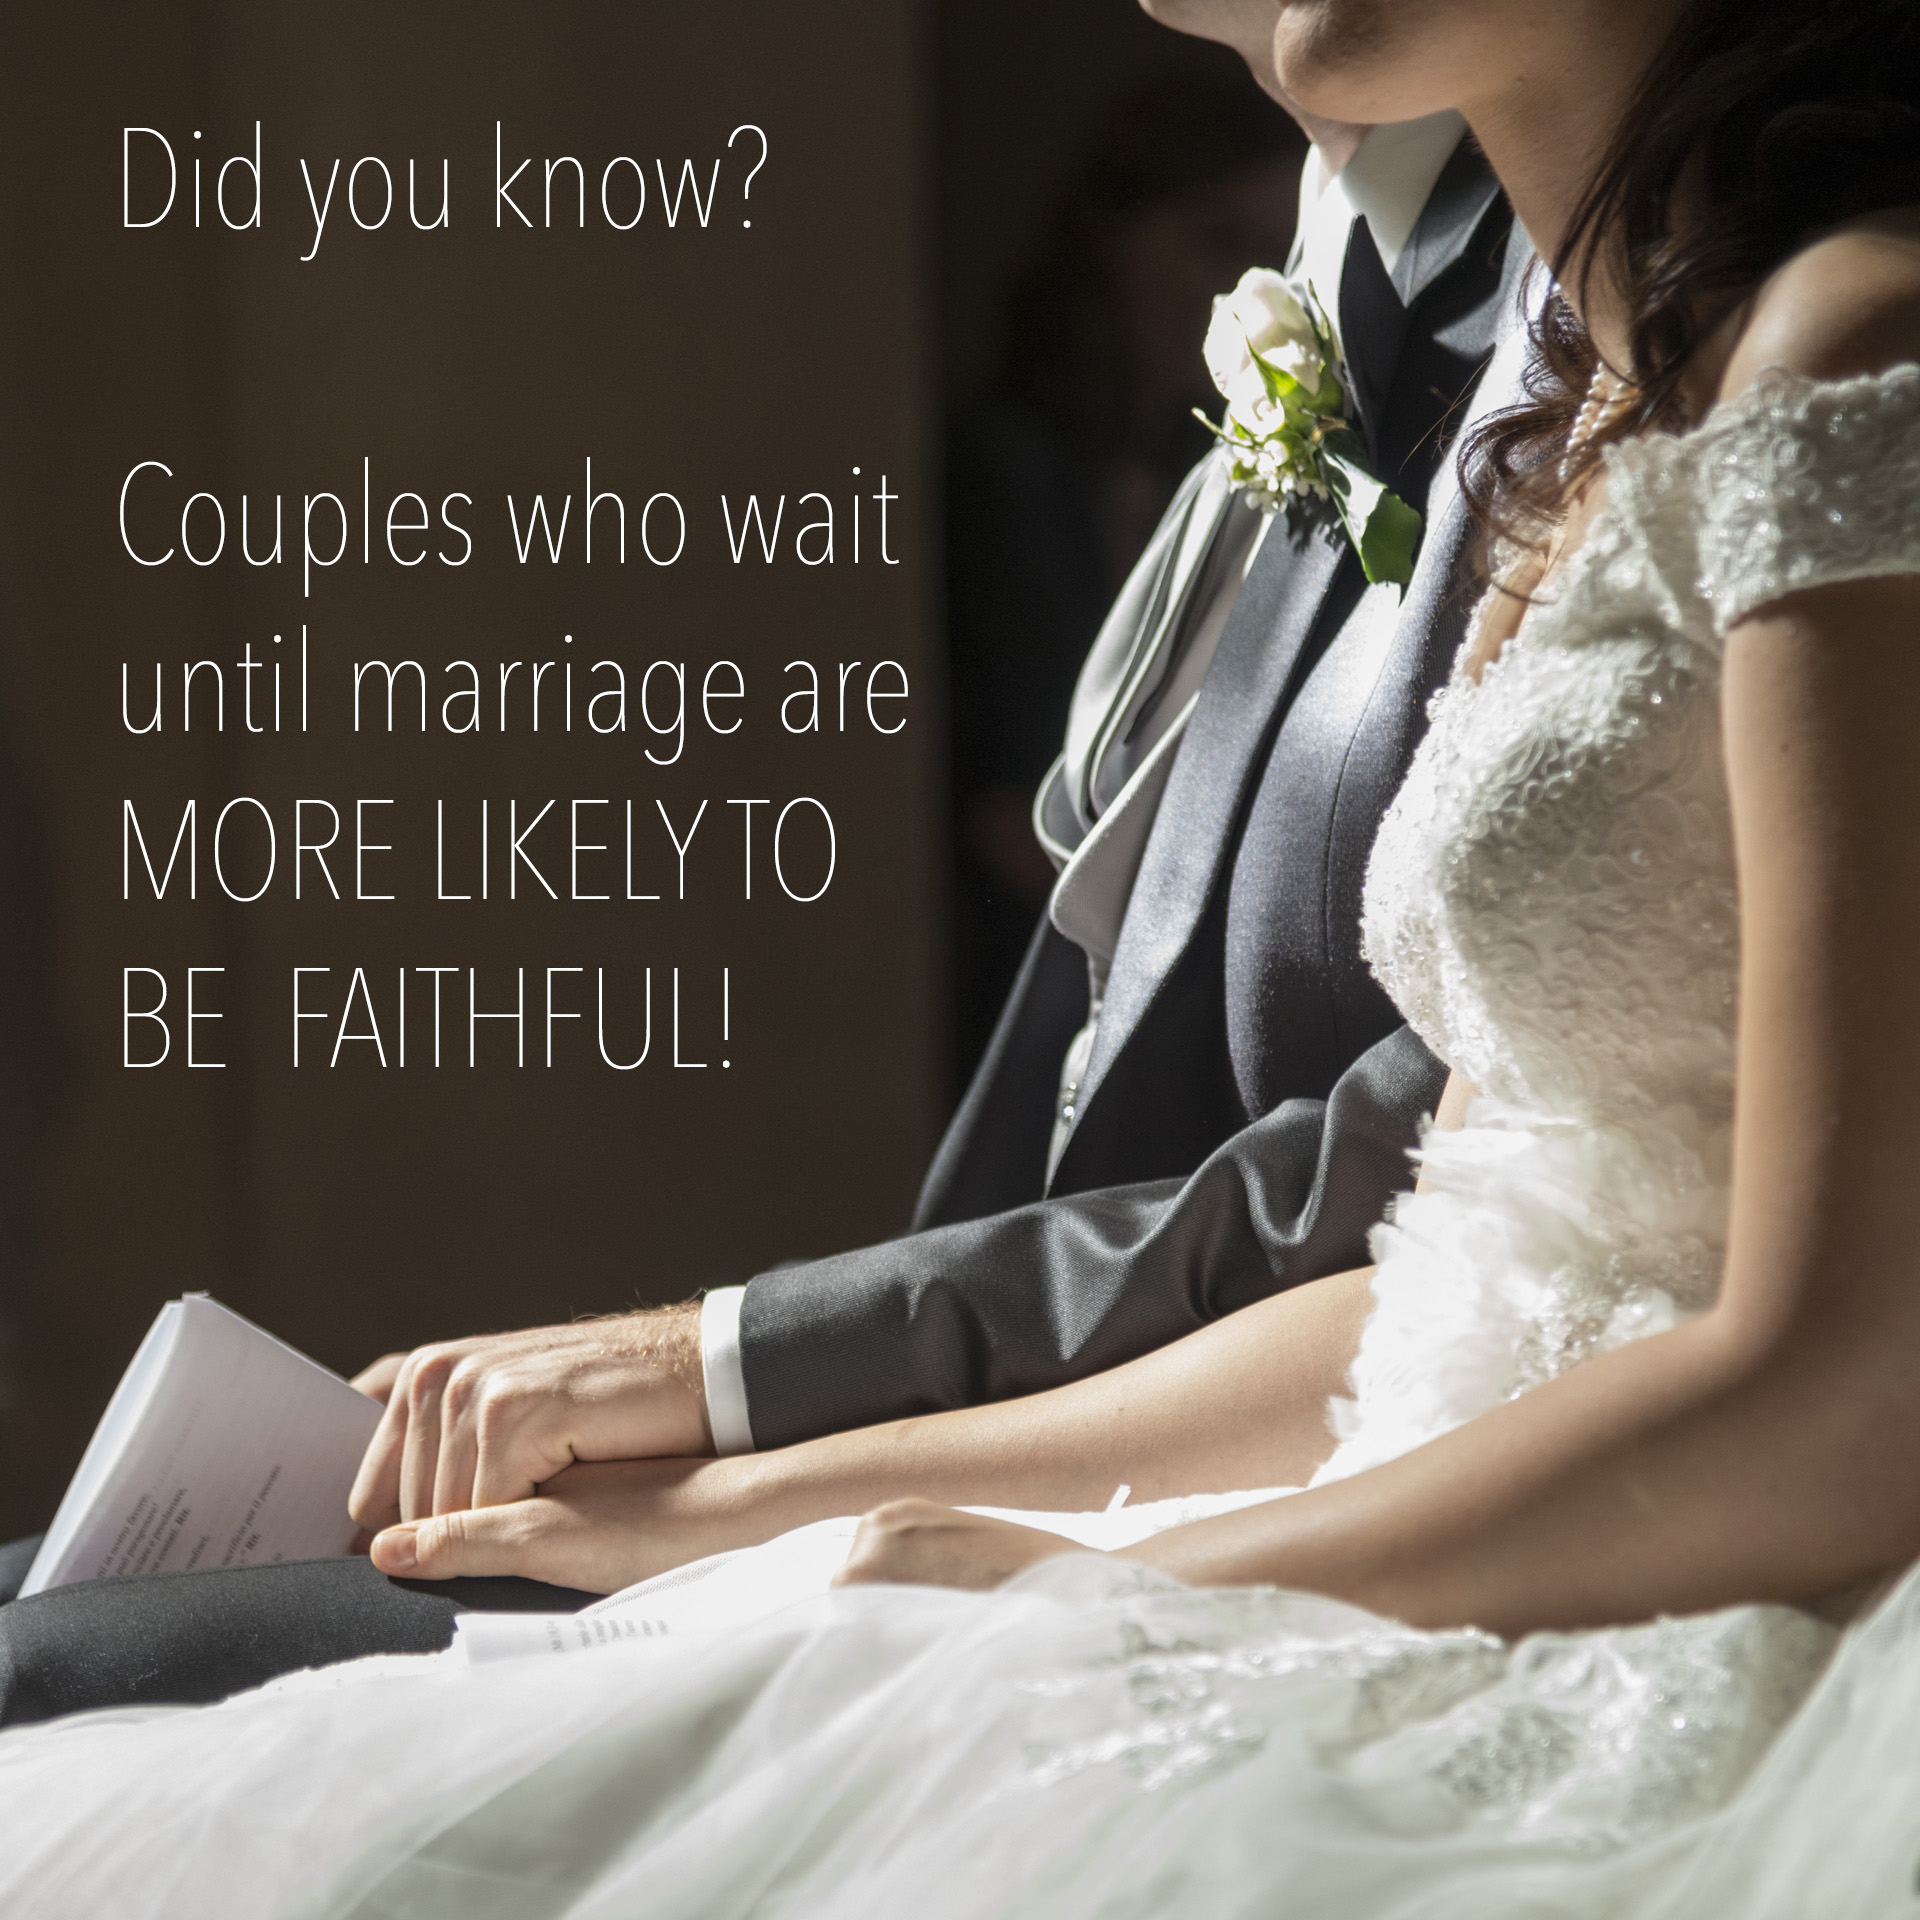 Did you know? Couples who wait until marriage are MORE LIKELY TO BE FAITHFUL!